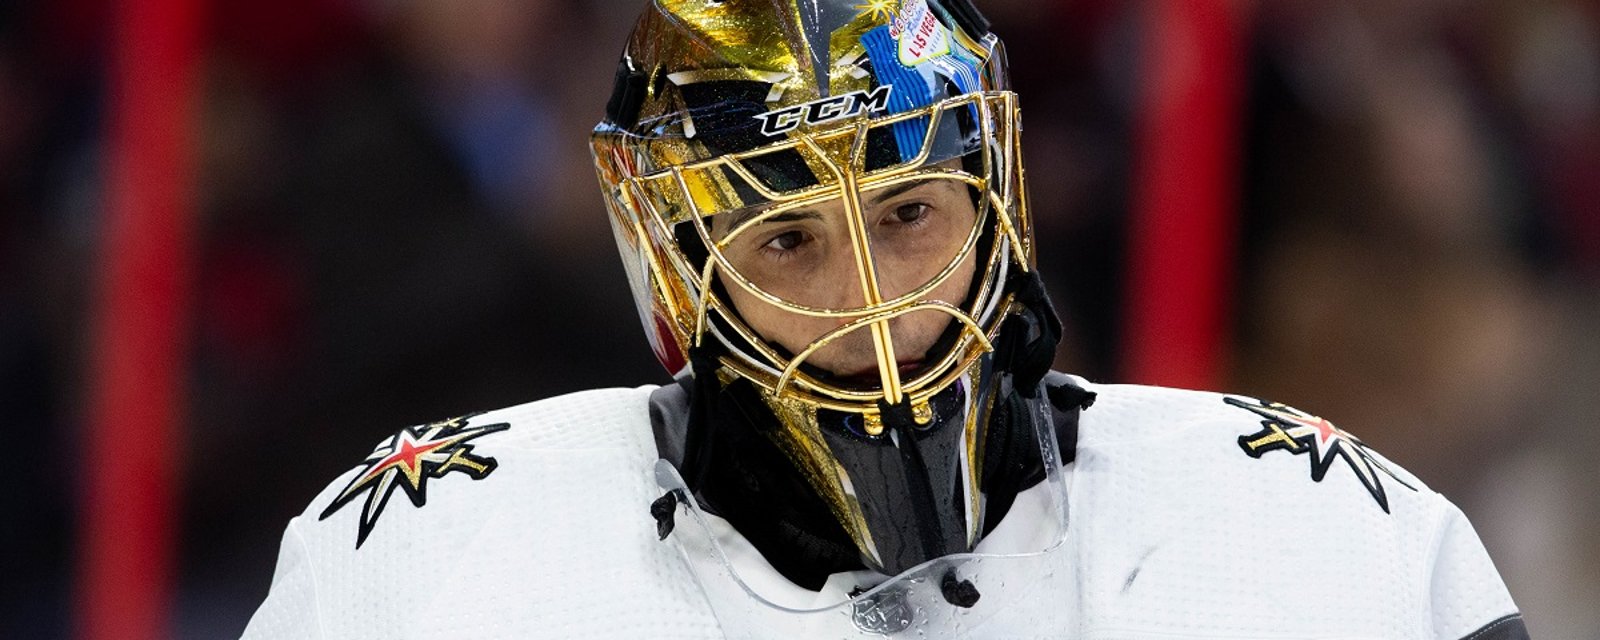 Marc Andre Fleury benched for the first game of the playoffs.